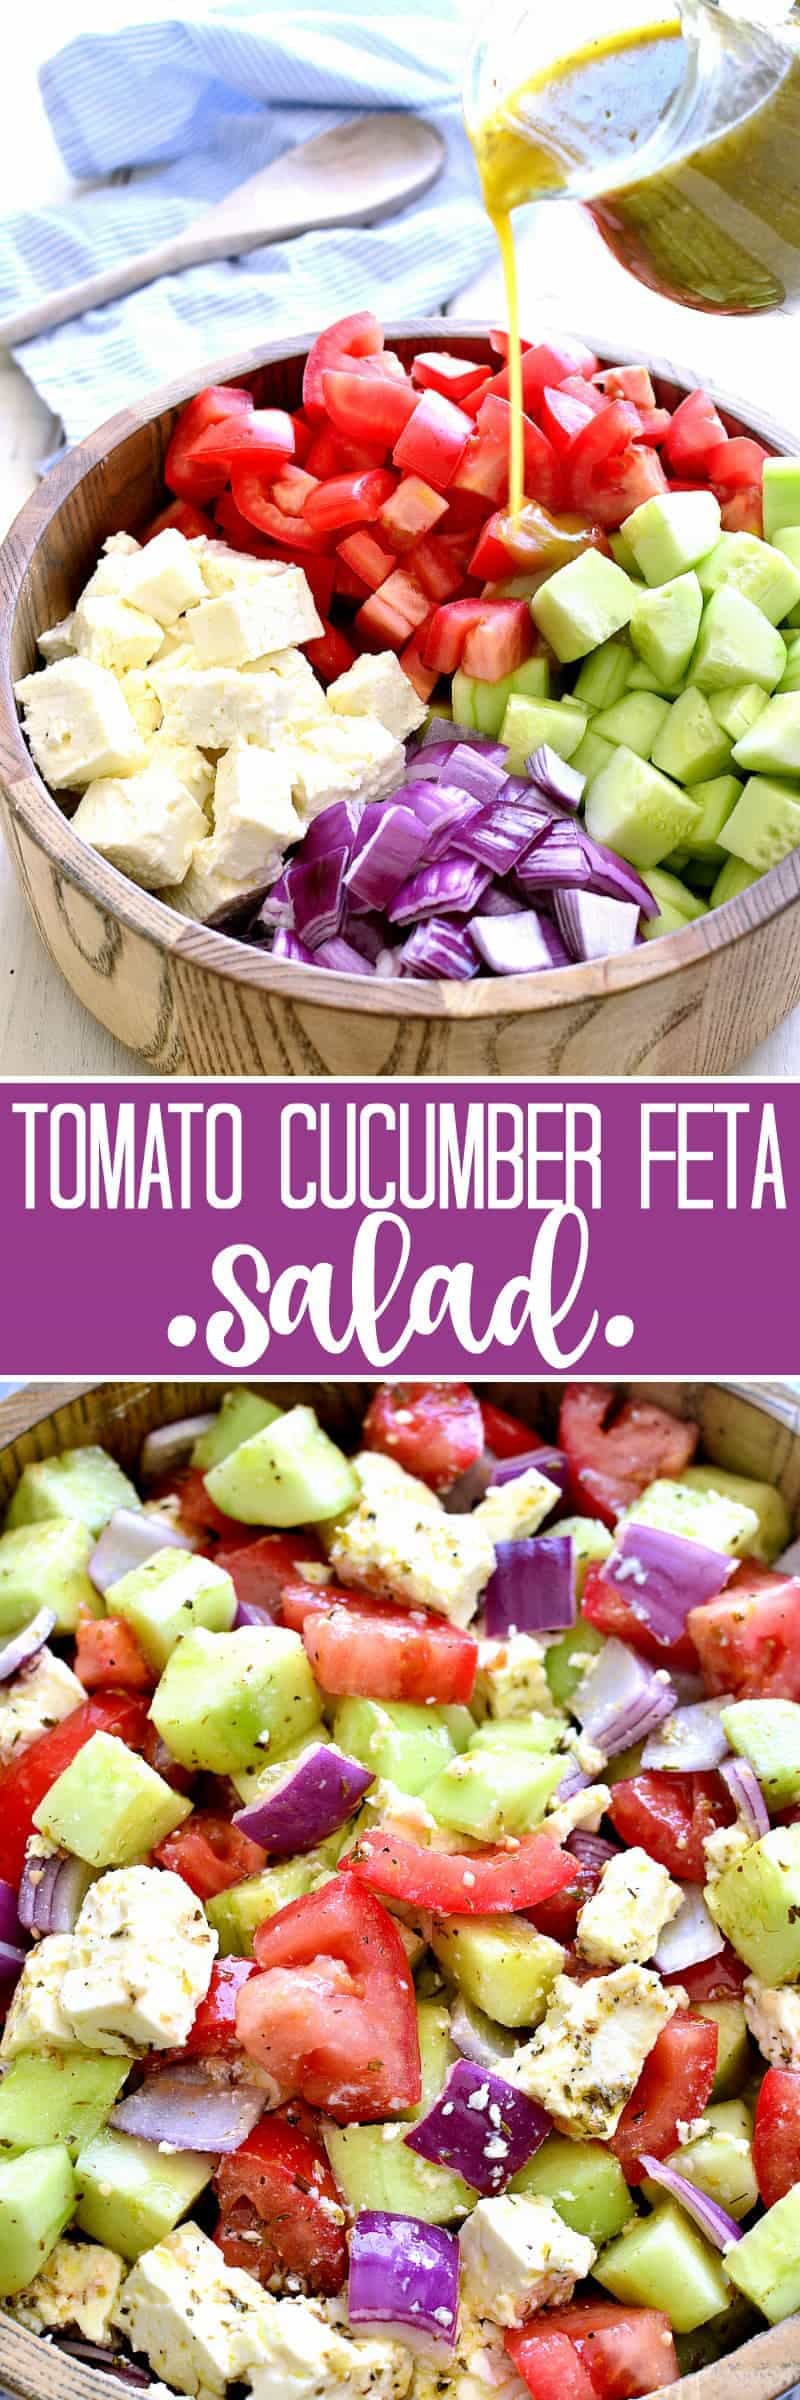 This Tomato, Cucumber & Feta Salad is fresh, flavorful, and SO delicious! It comes together quickly with just a handful of ingredients and is one of our favorite go-to salads for summer!